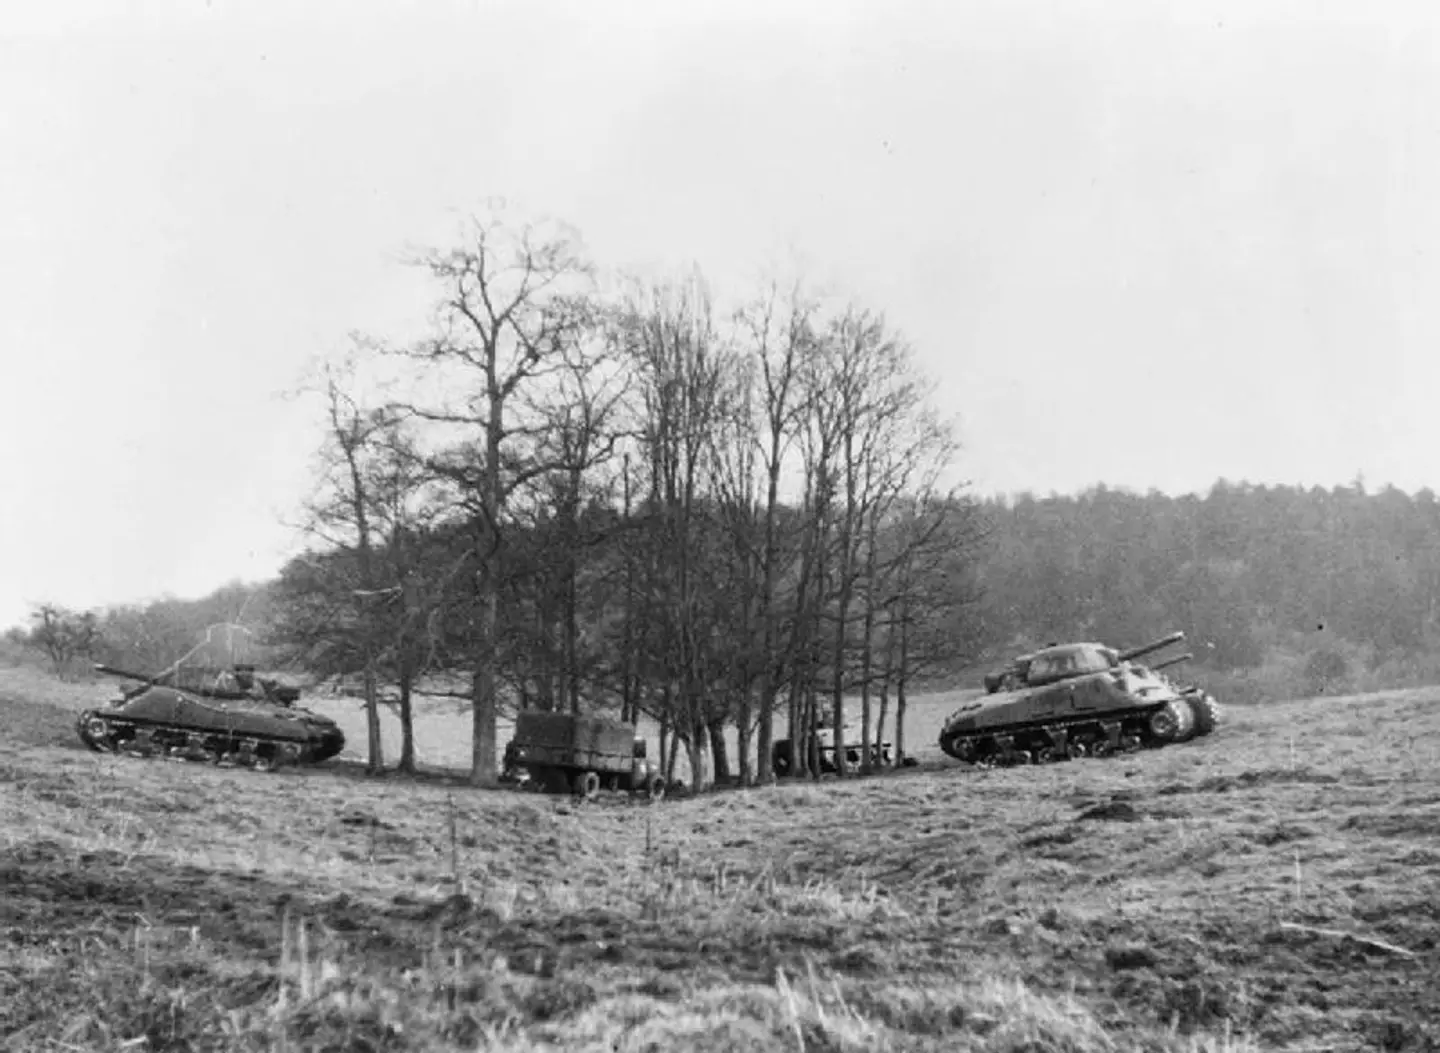 Inflatable tanks were used to trick the Nazis during World War Two.